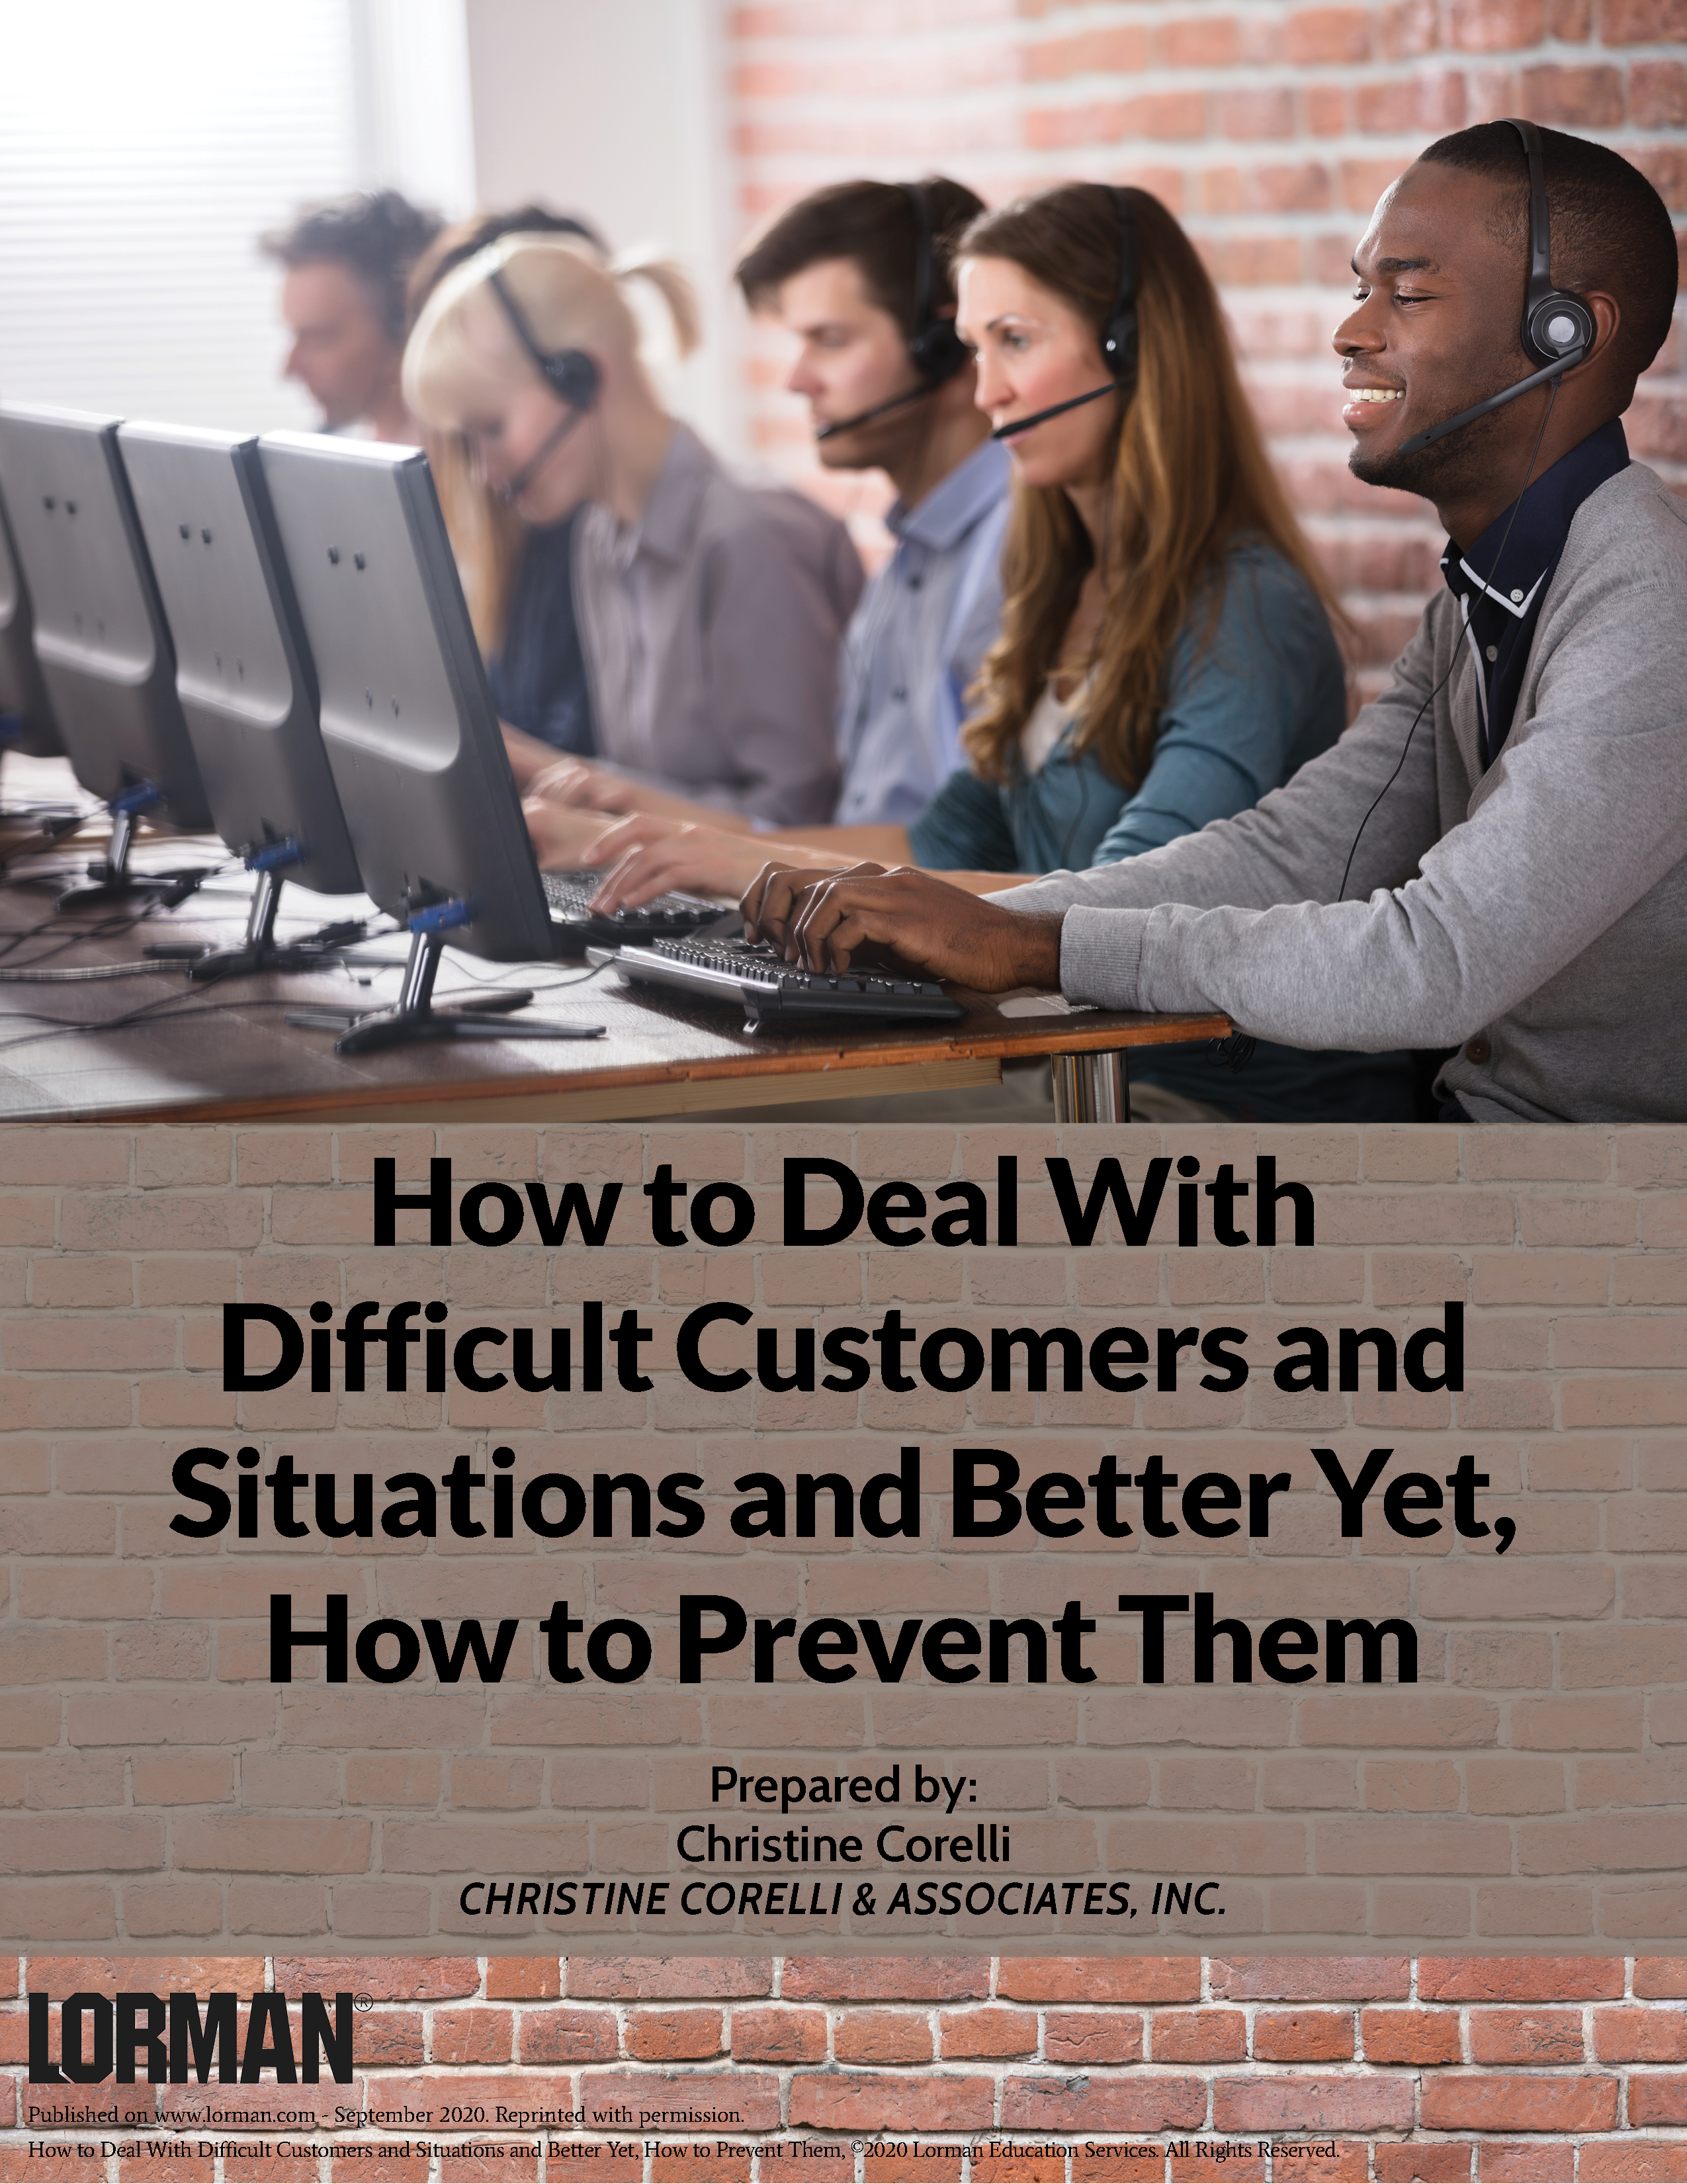 How to Deal With Difficult Customers and Situations and Better Yet, How to Prevent Them